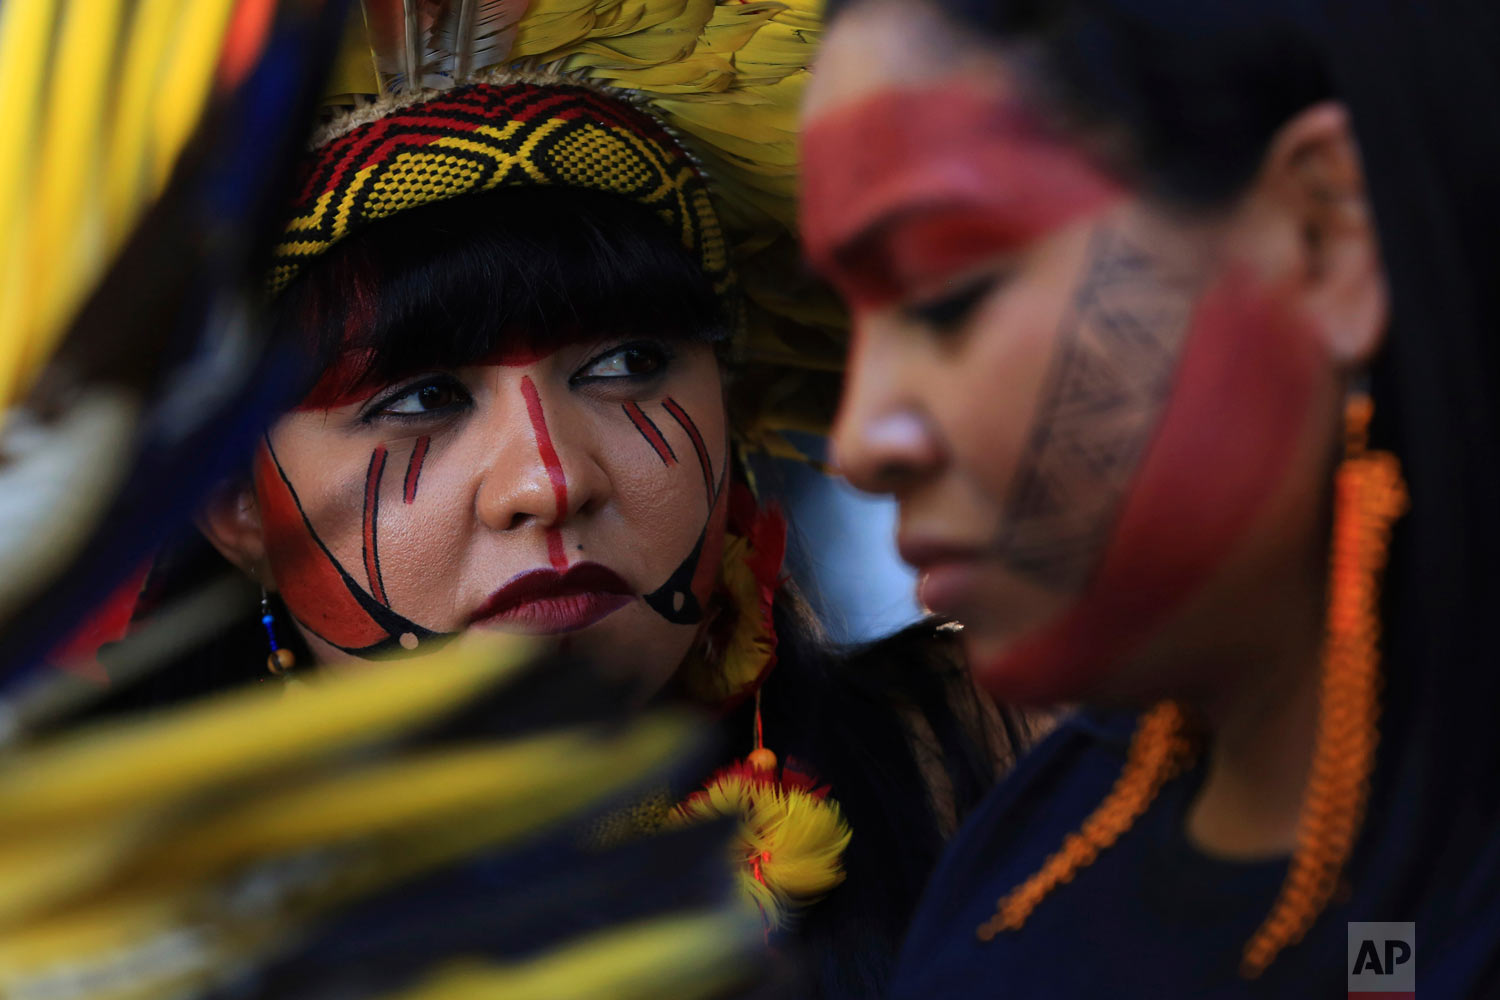  Indigenous women protest the government's policies on land and environmental protections outside the Agriculture Ministry in Brasilia, Brasil, Jan. 31, 2019. (AP Photo/Eraldo Peres) 